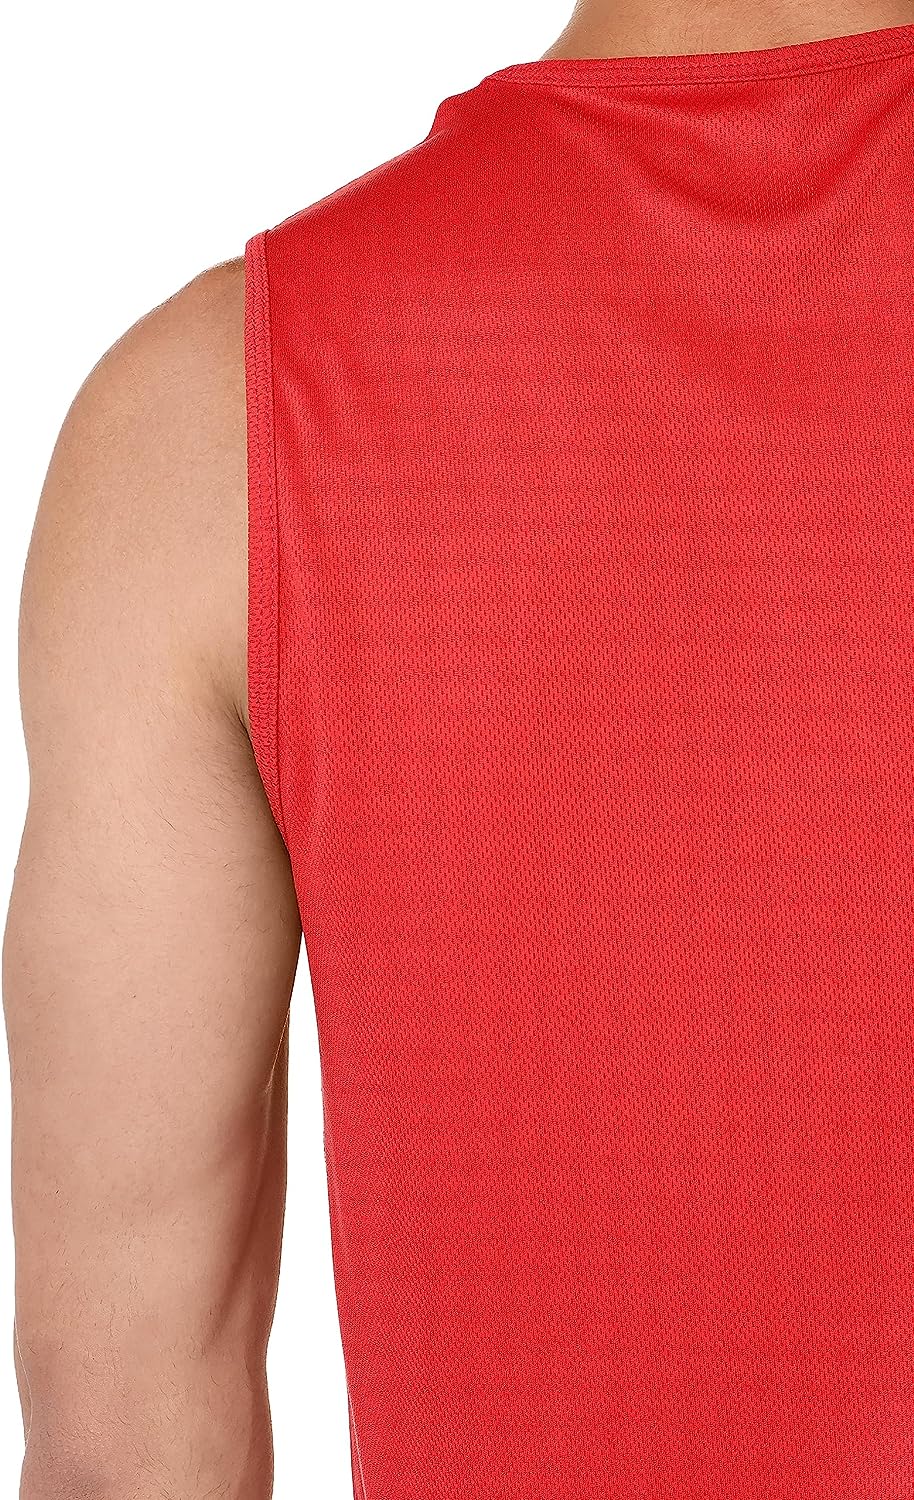 ACTIV LINEAR SPORTS TANKTOP - RED TNSS23-40224 Activ Abou Alaa